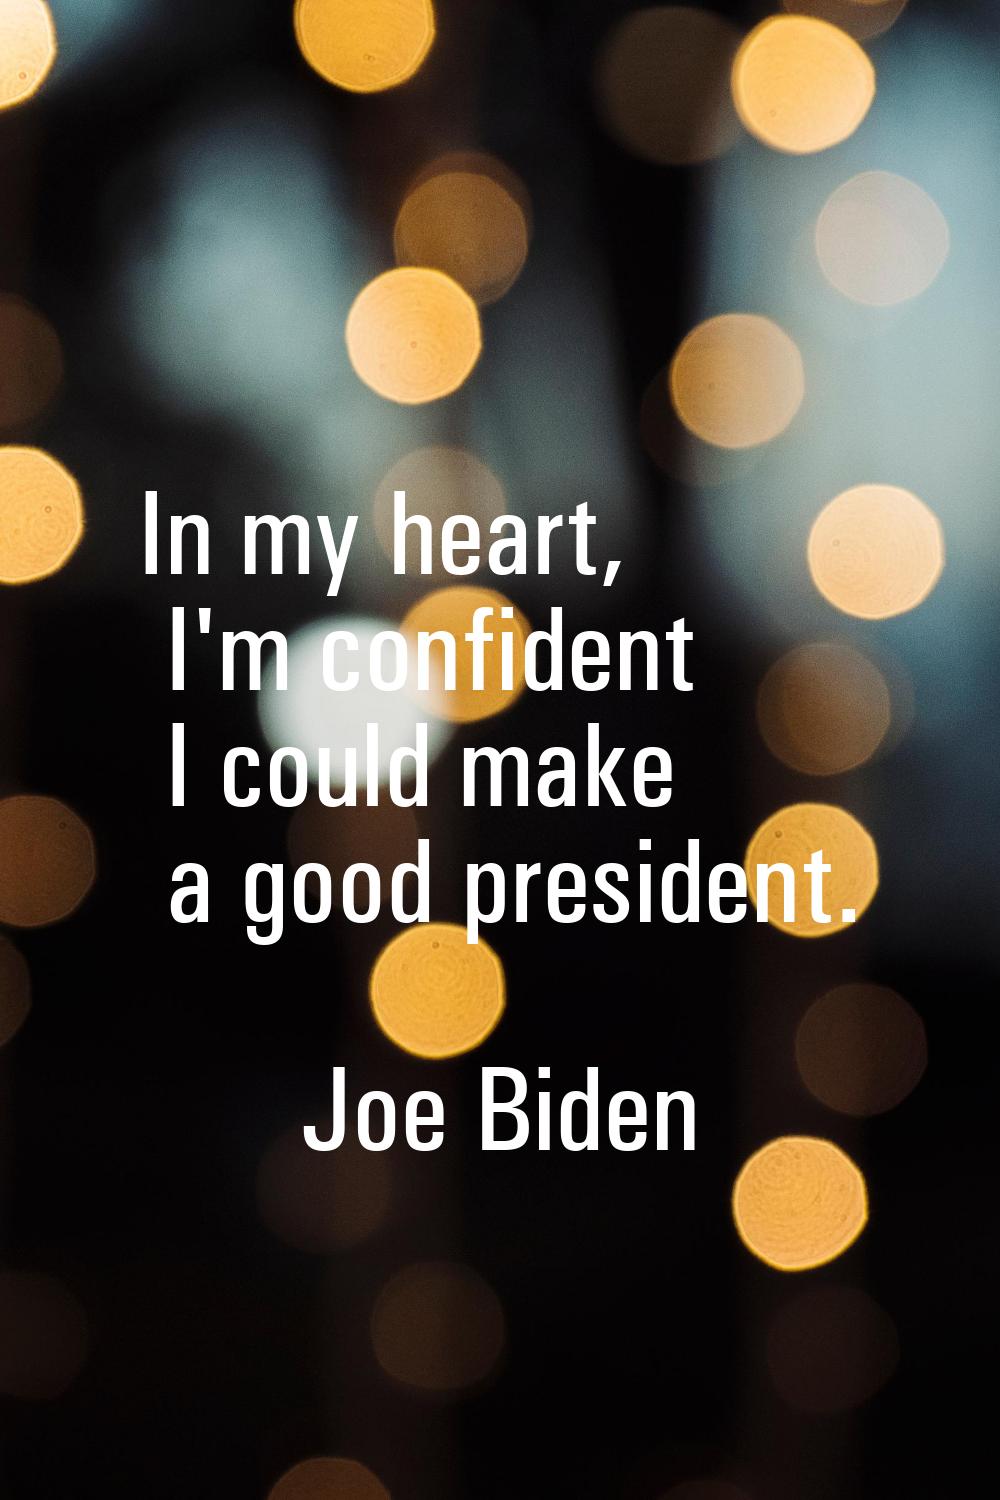 In my heart, I'm confident I could make a good president.